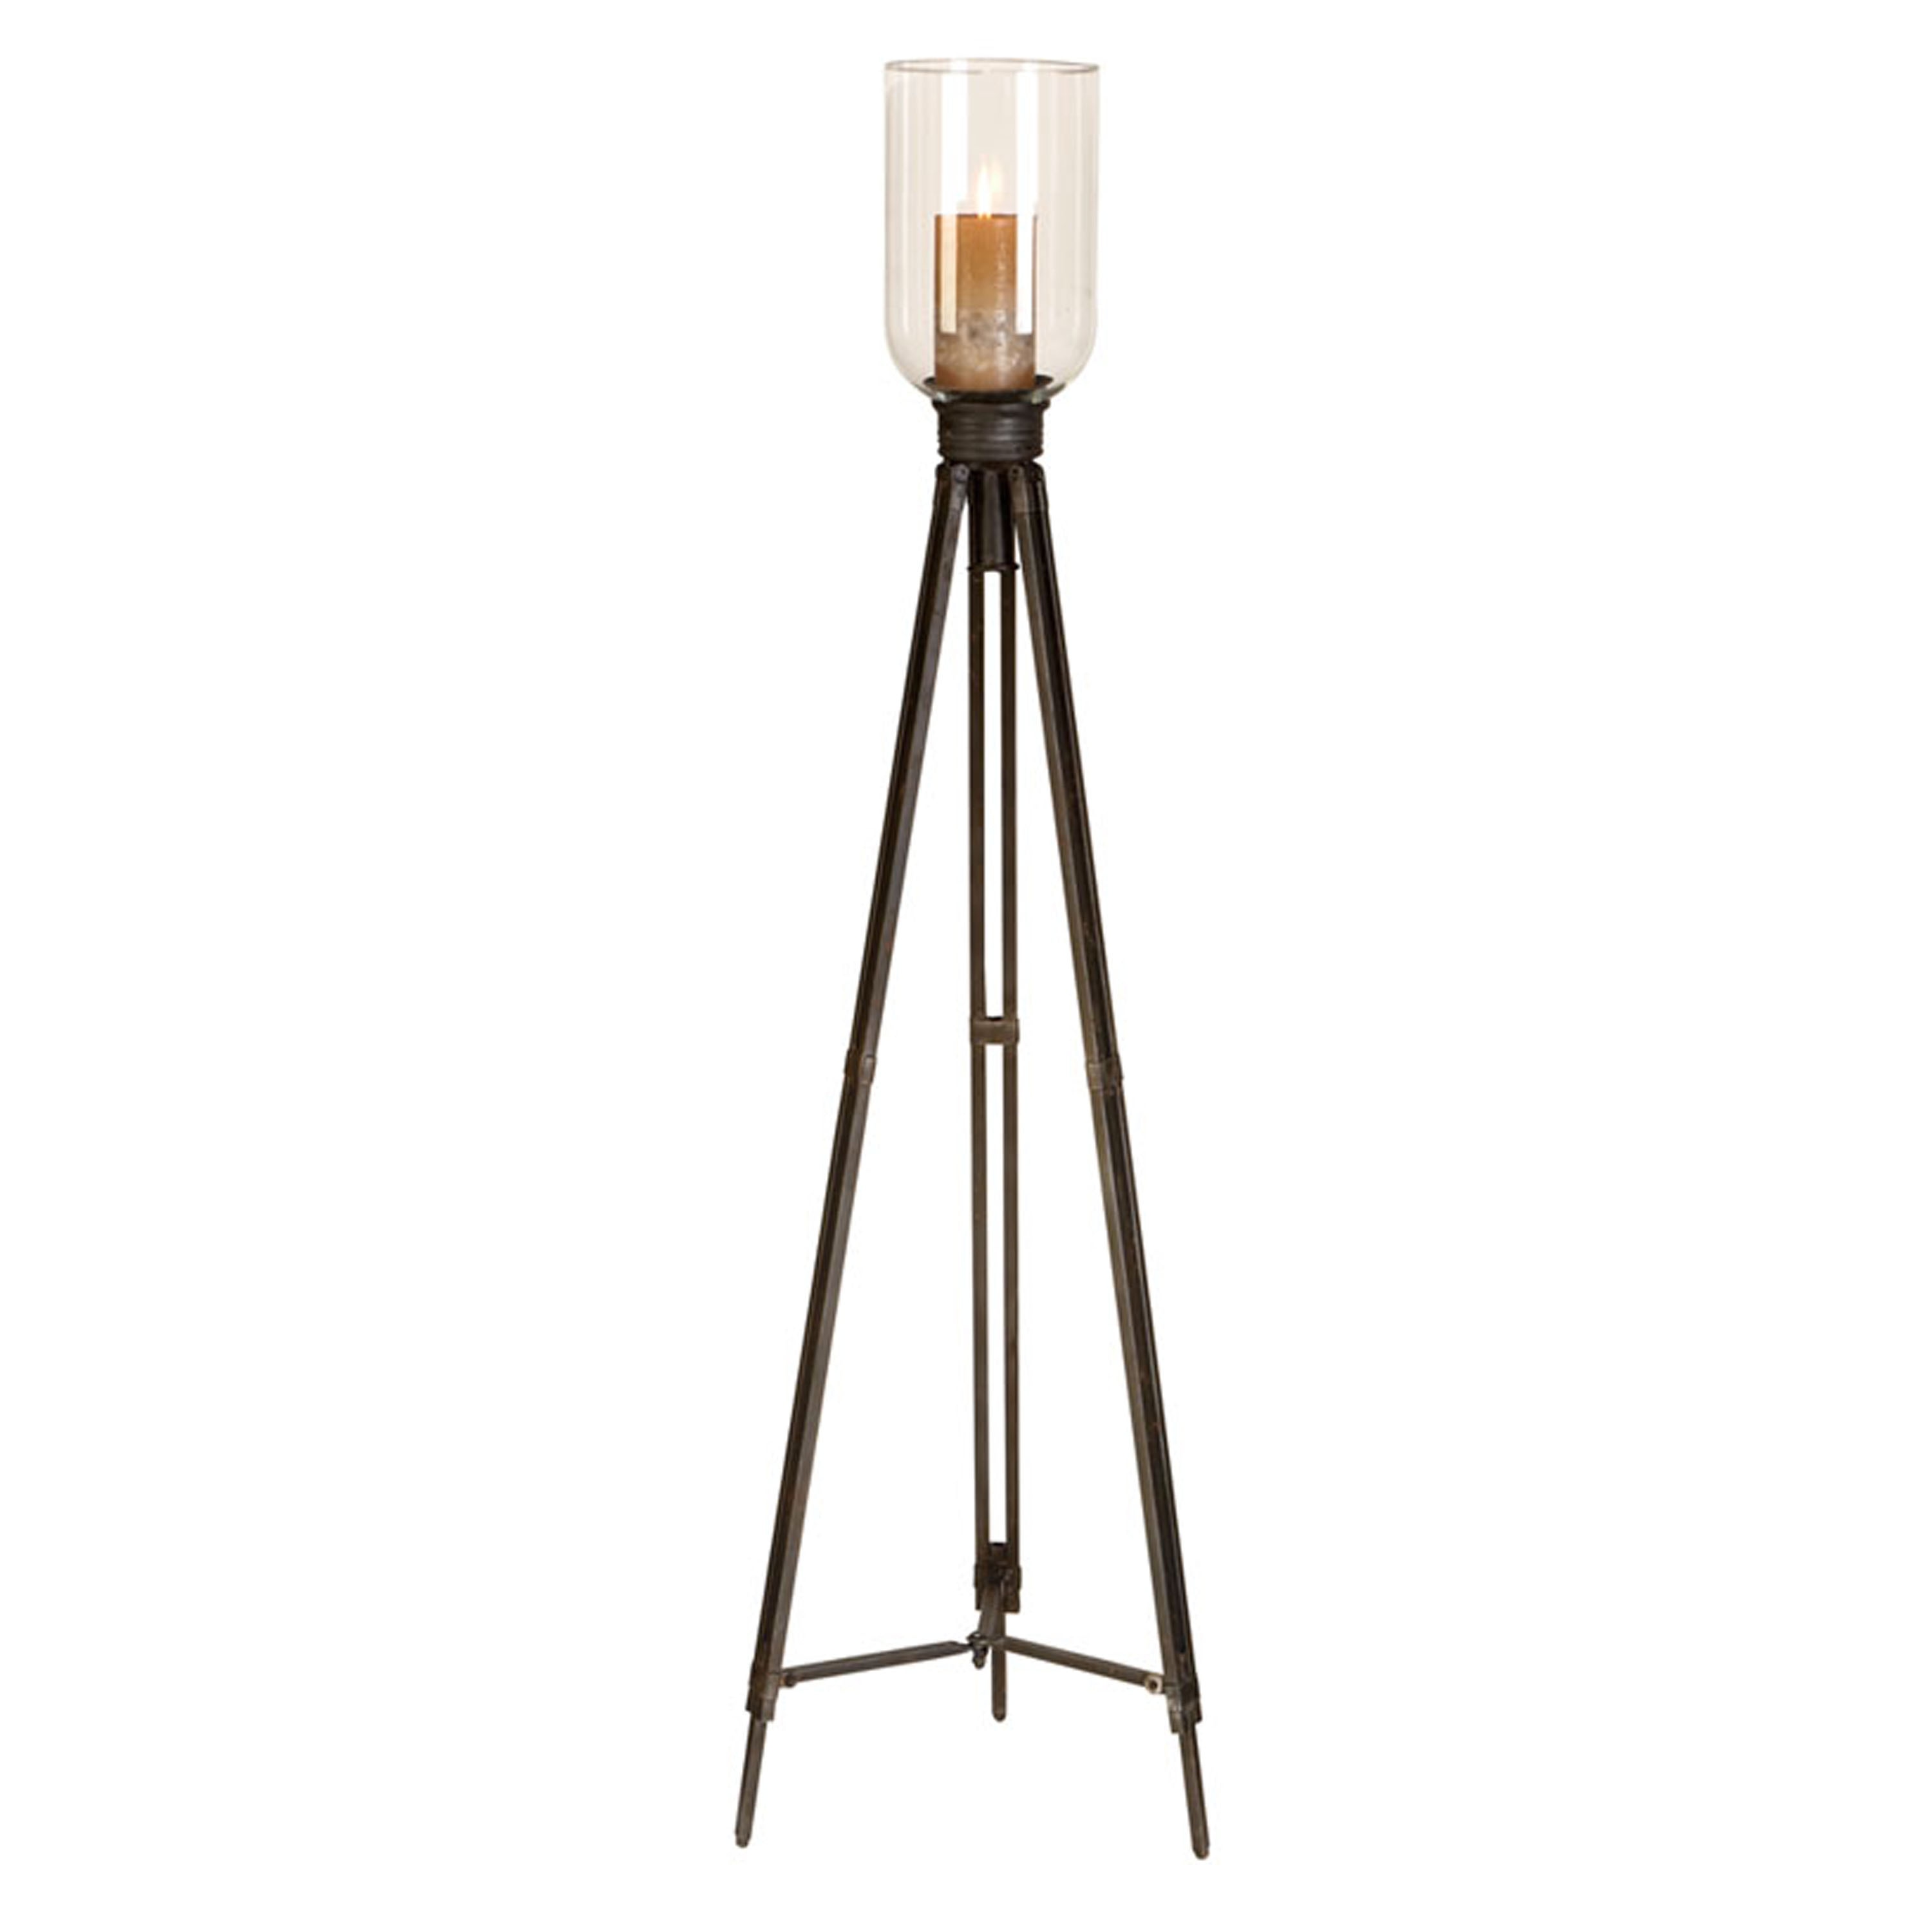 Antiqued 50 inch Indoor/outdoor Tripod Floor Standing Candle Holder With Clear Glass Top